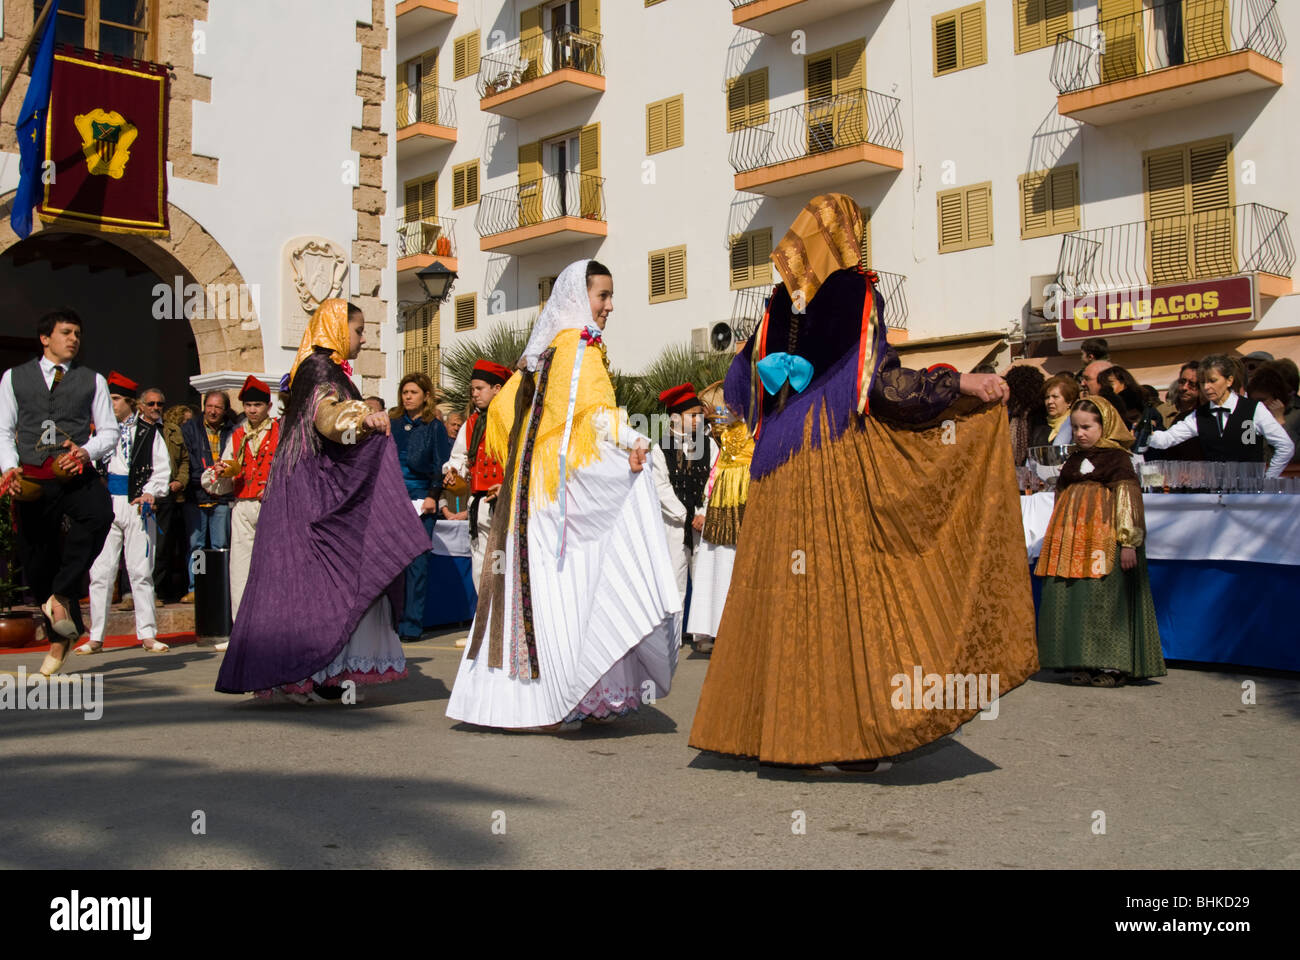 Women in traditional costume performing folklore dances, Ibiza, Spain. Stock Photo